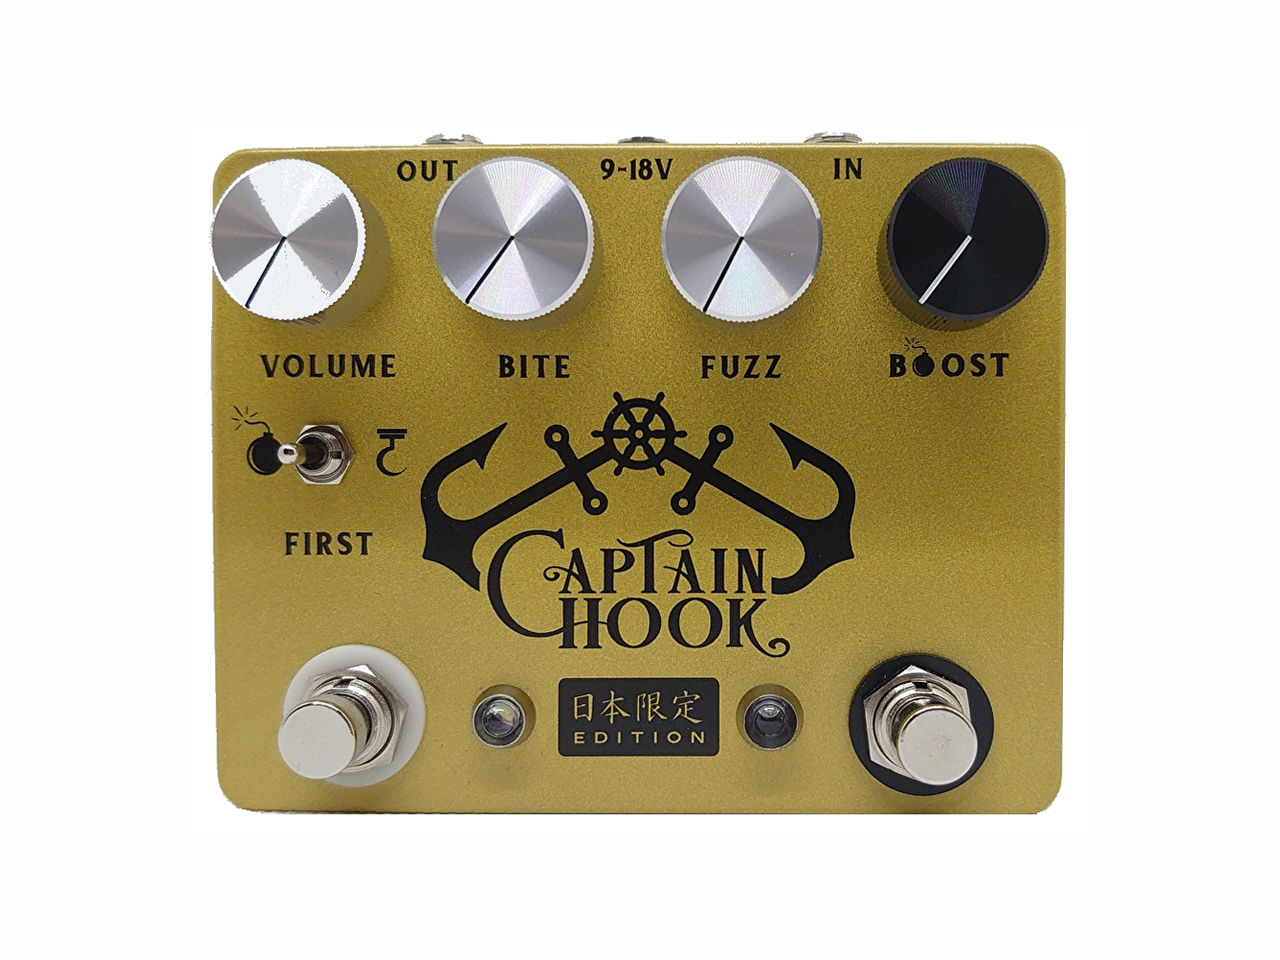 COPPERSOUND PEDALS(カッパーサウンドペダルズ) CAPTAIN HOOK (ファズ) お茶の水駅前店